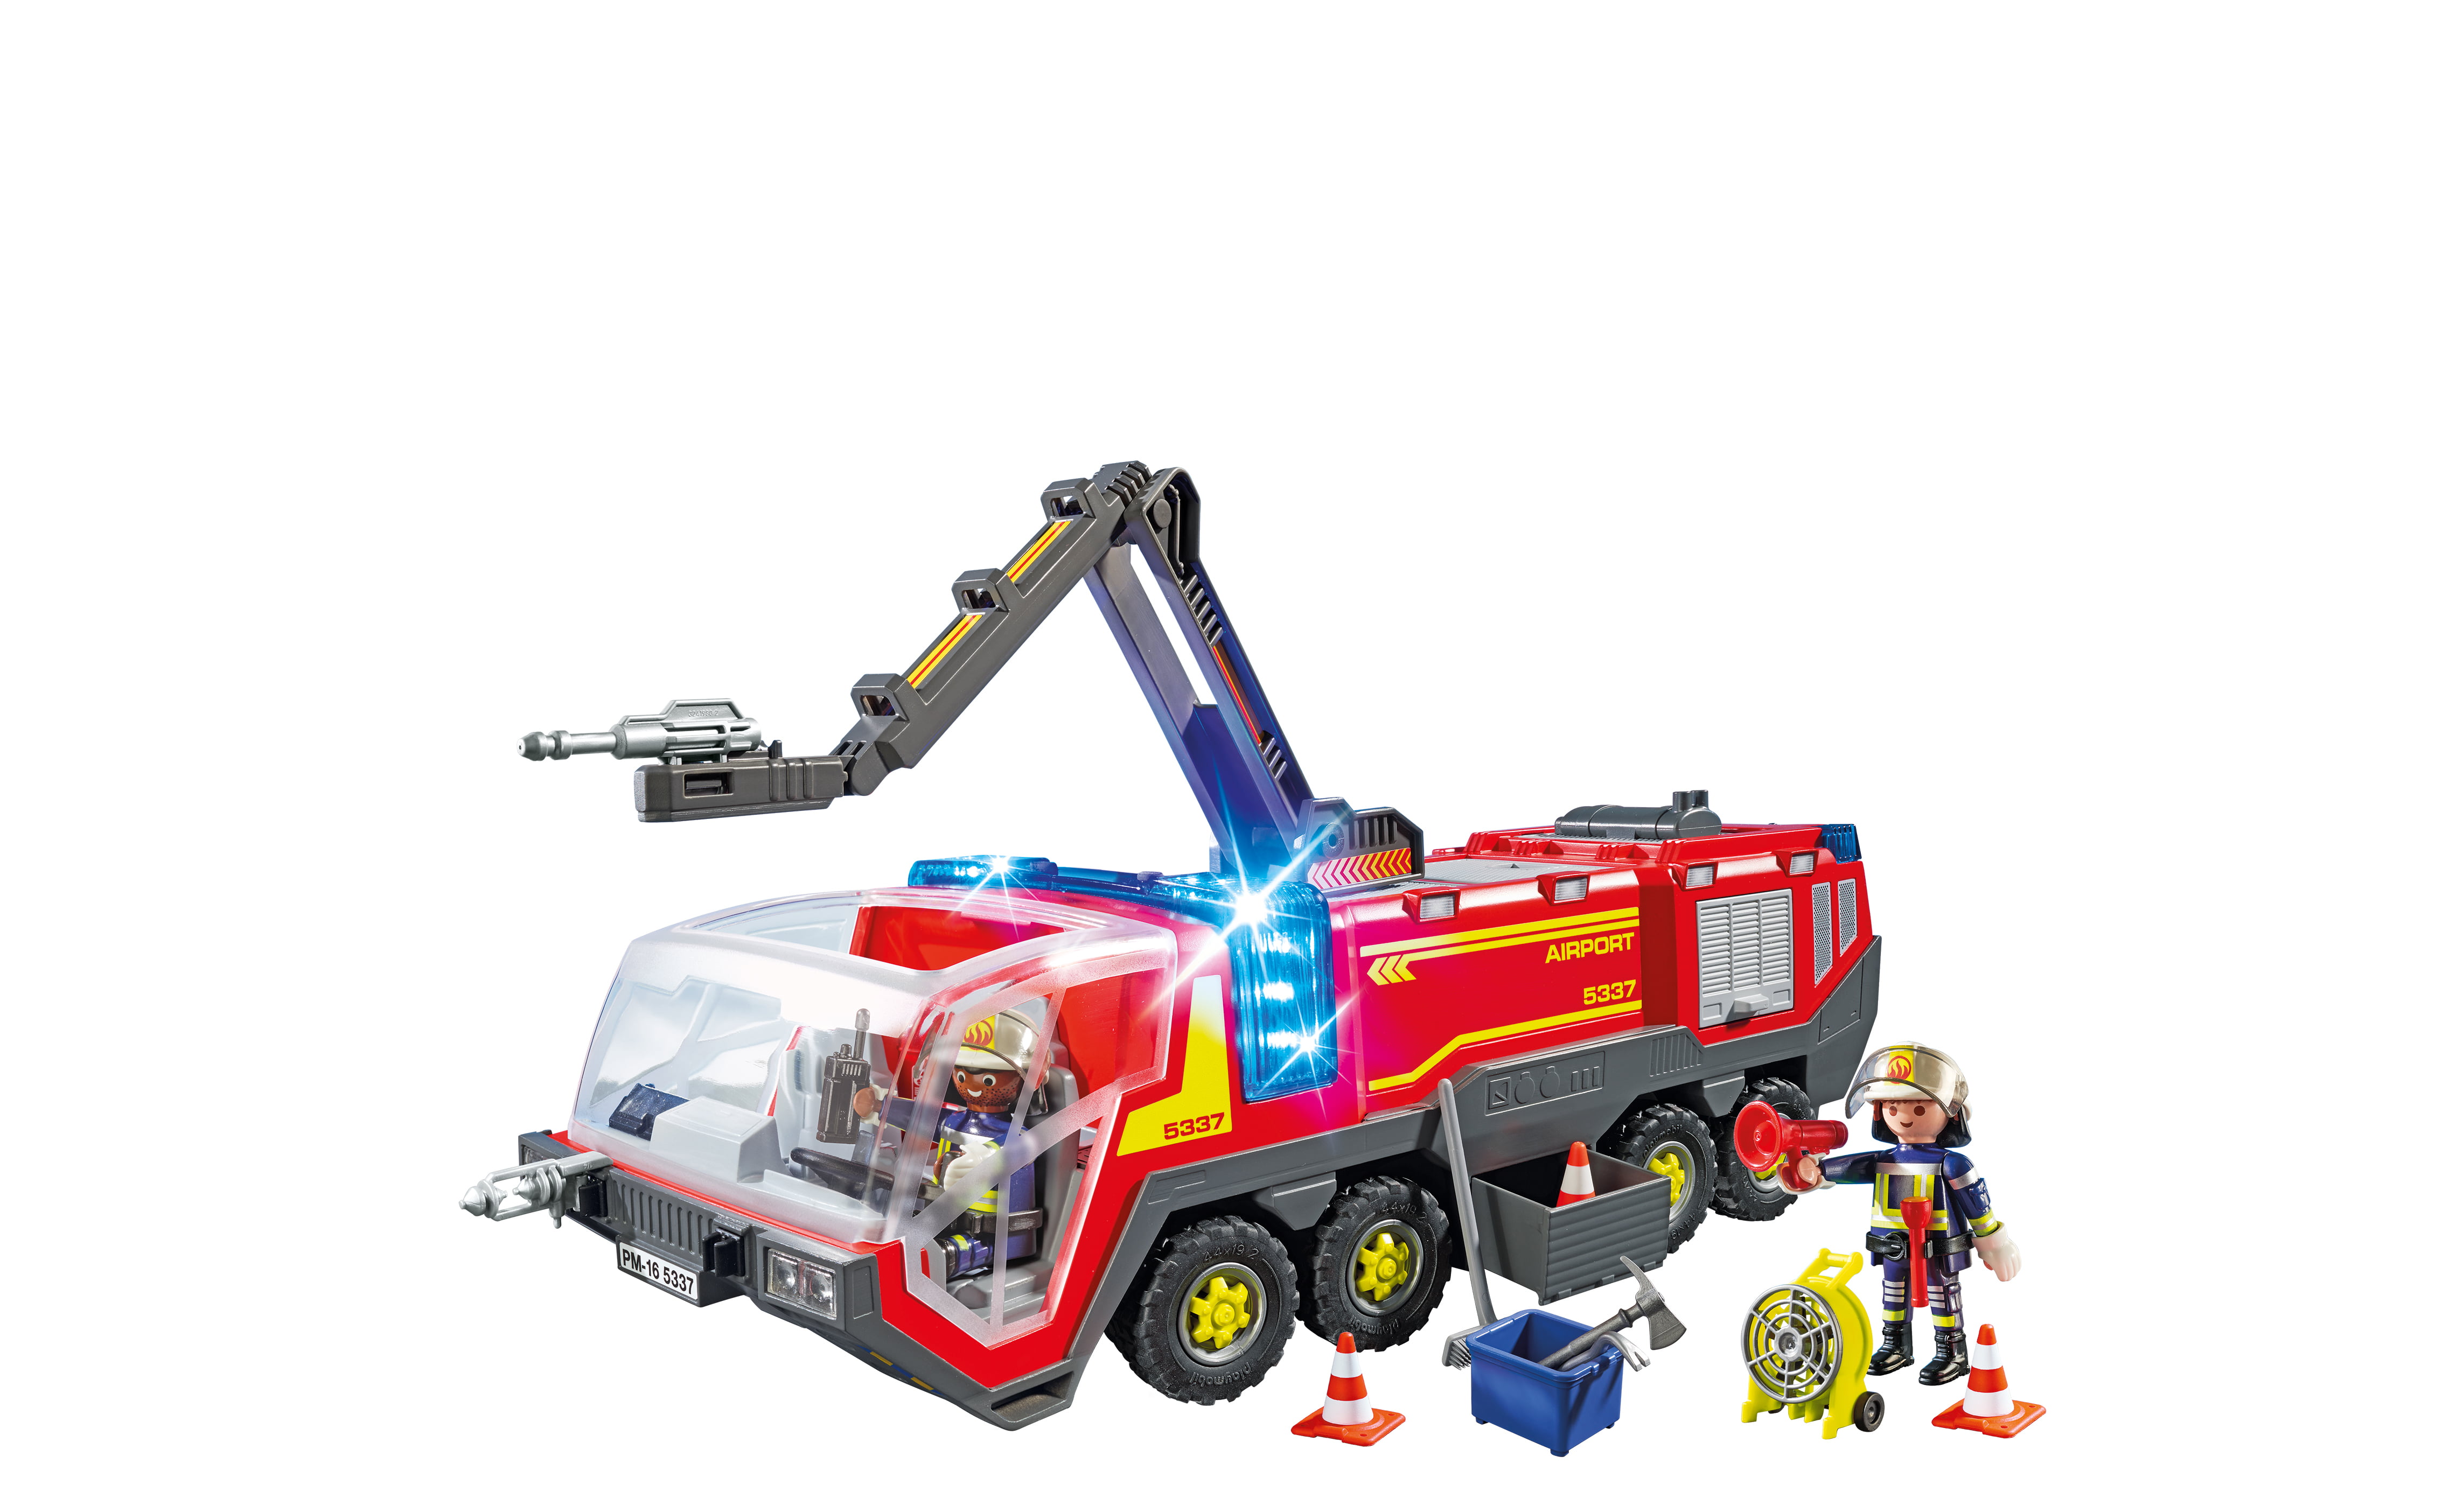 PLAYMOBIL Airport Fire Engine with Lights and Sound Vehicle Playset